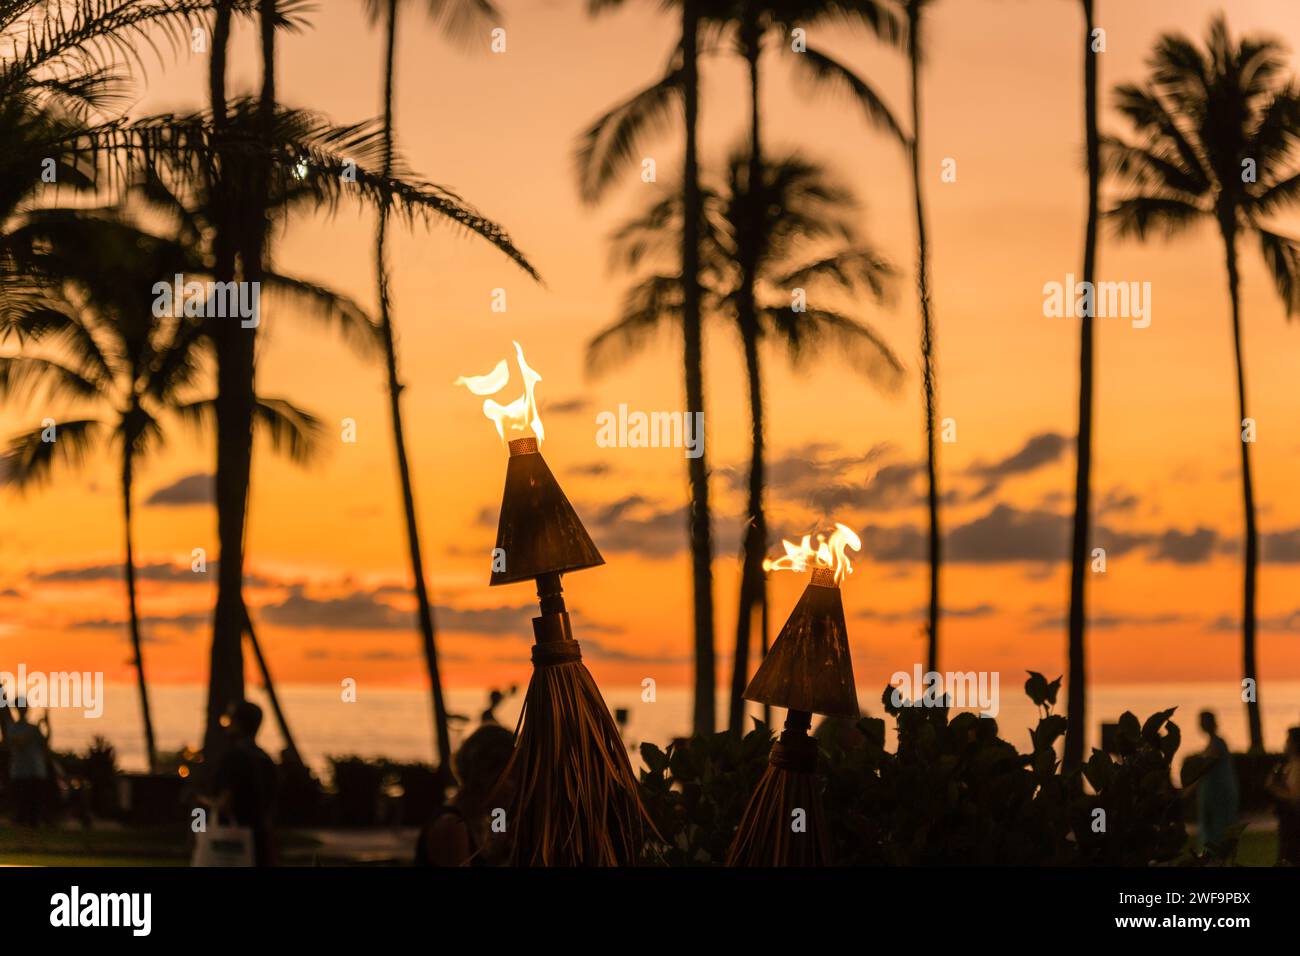 Palm trees at  beach in tropical location against brilliant orange sunset sky with burning torches in foreground. Stock Photo